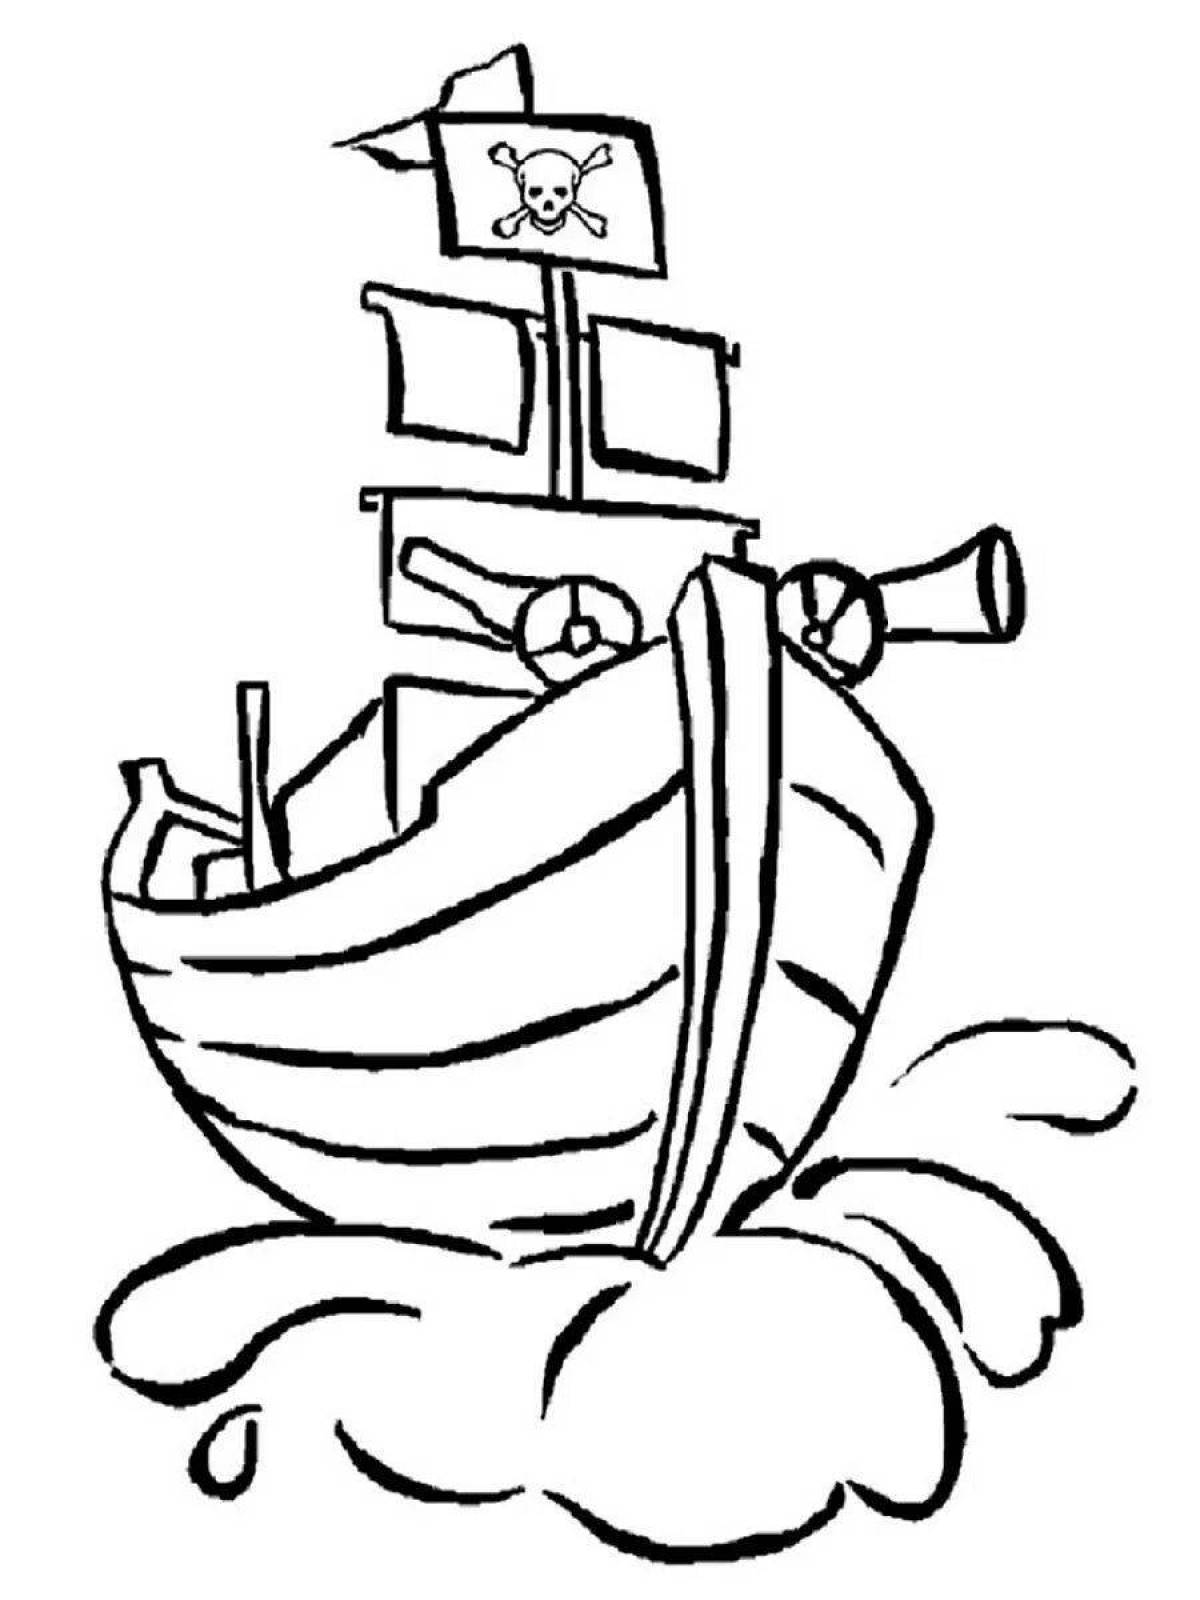 Glitter pirate ship coloring page for kids